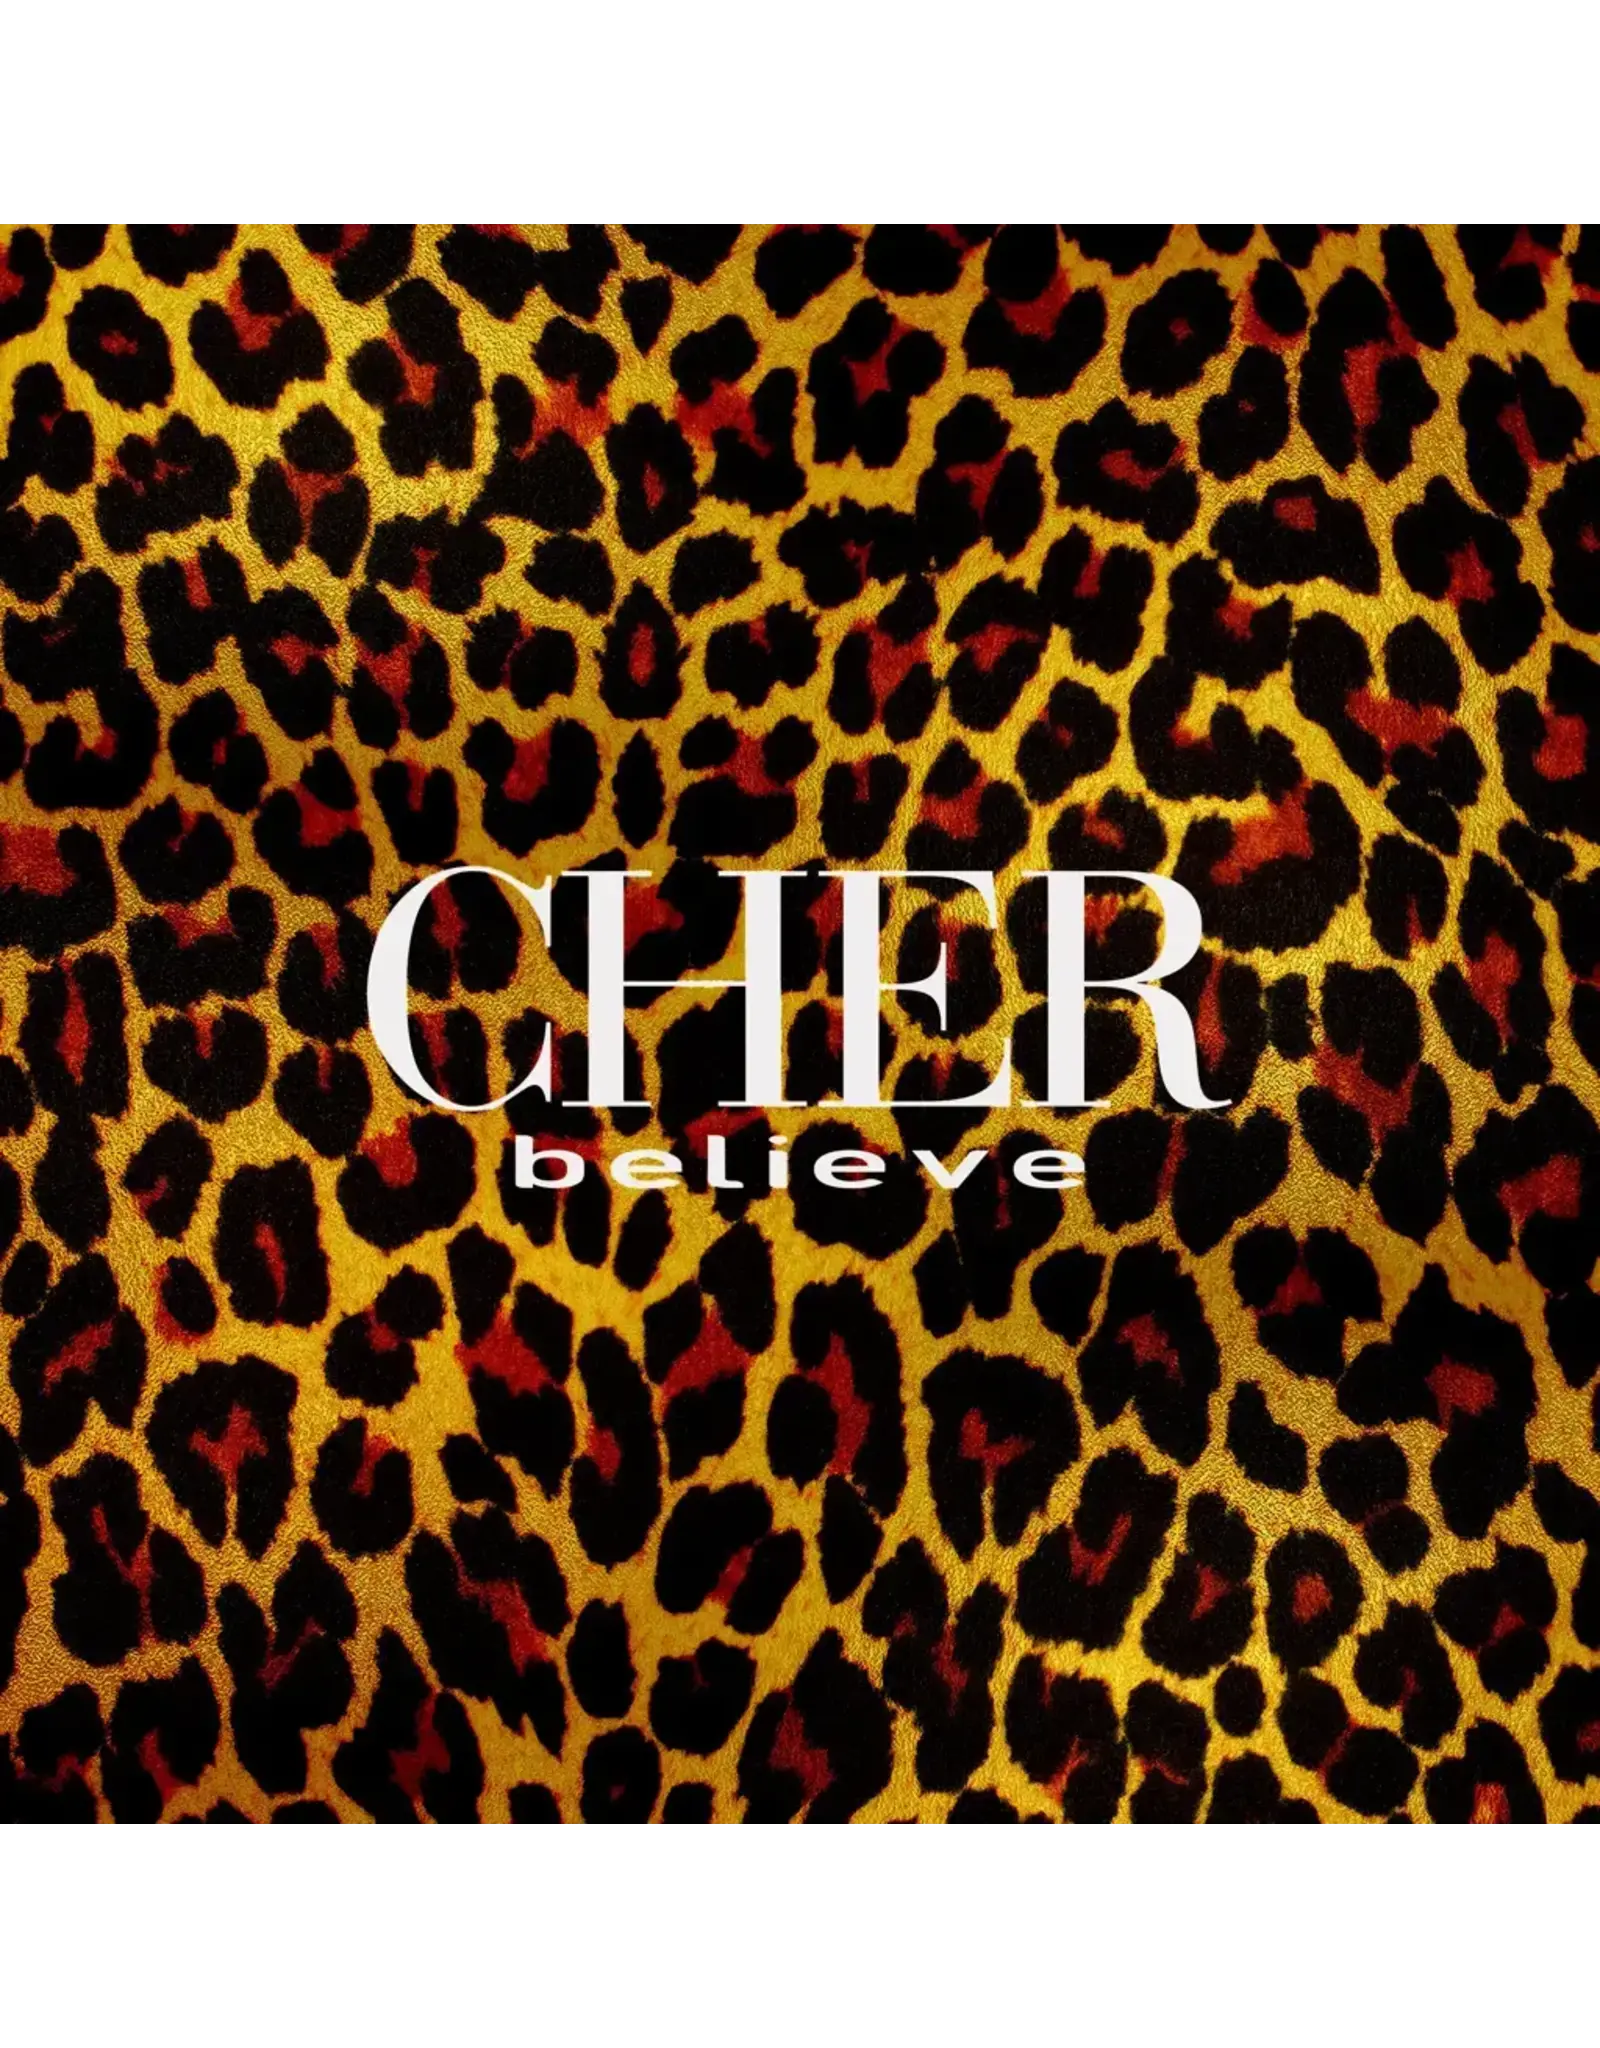 Cher - Believe (25th Anniversary) [Deluxe Edition]